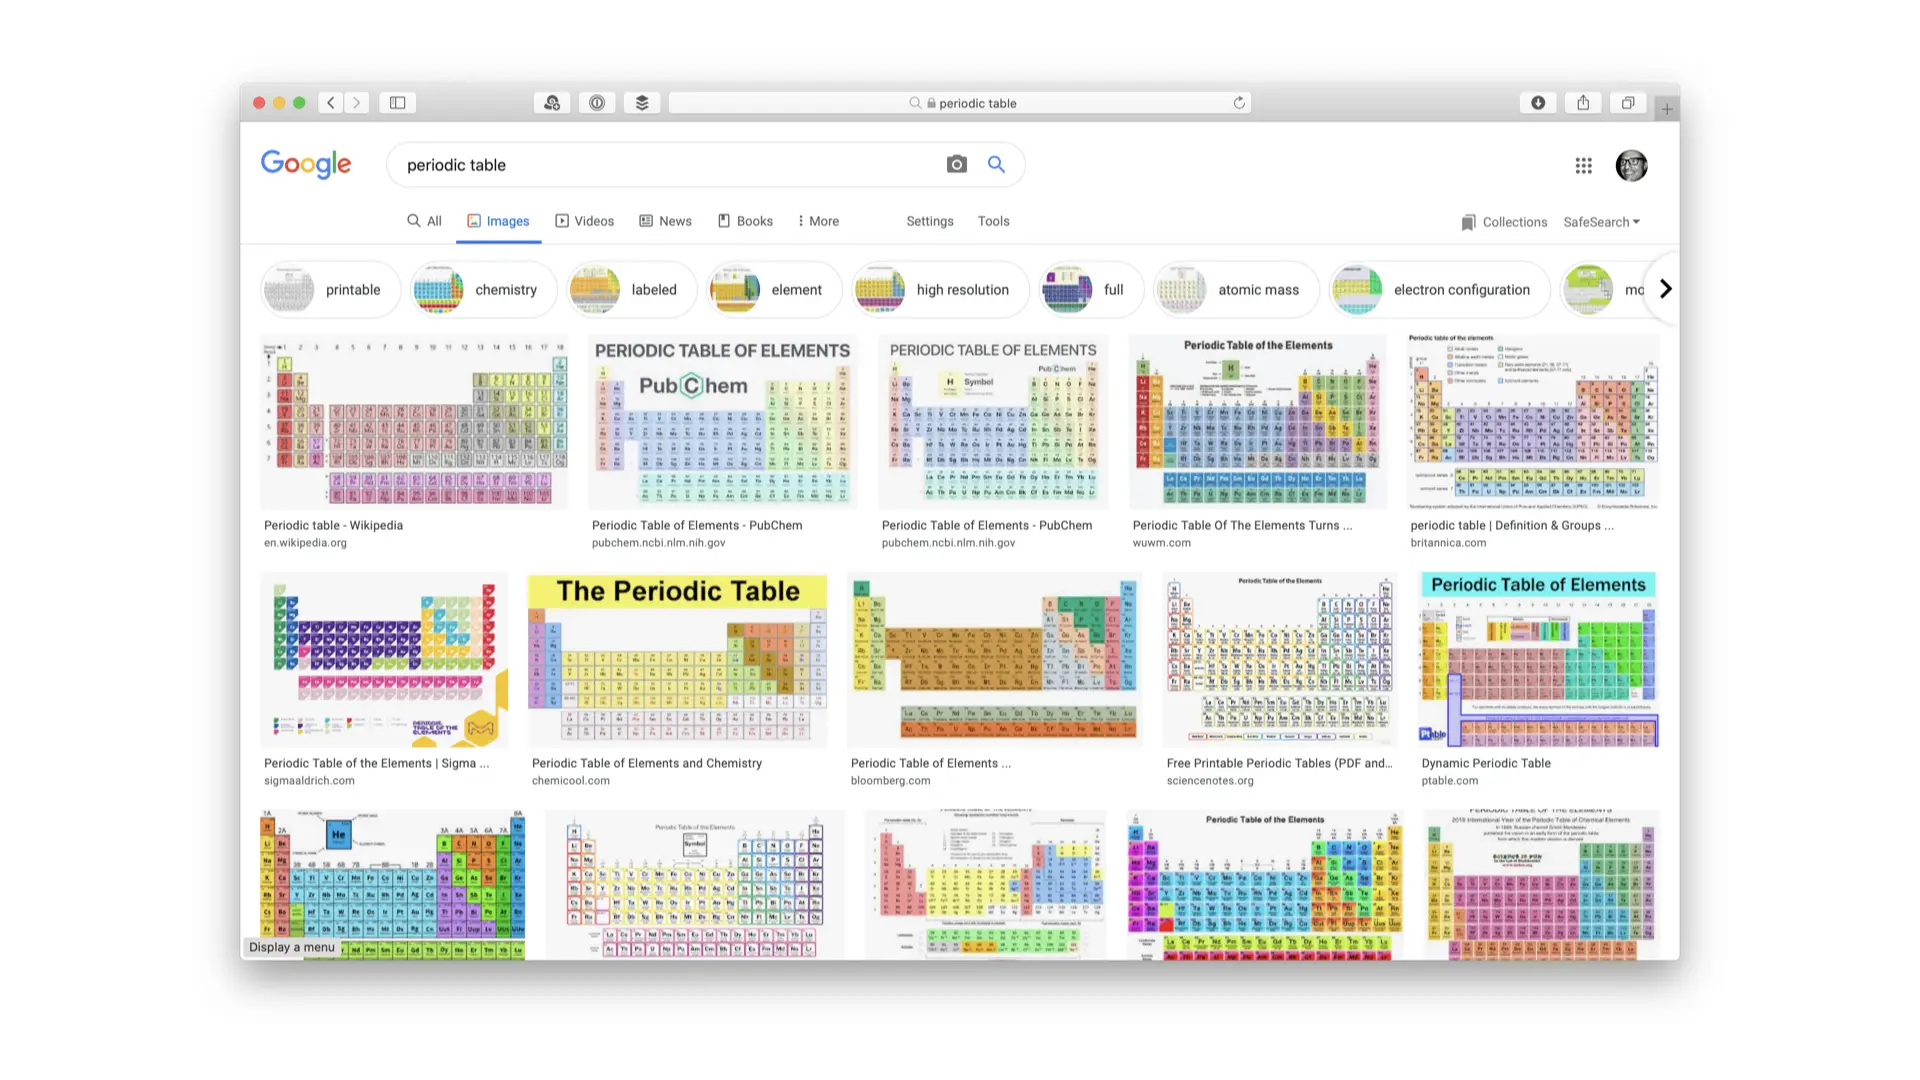 A screenshot of a Google search results page for 'periodic table,' displaying thumbnails of various periodic table images with color-coded elements.